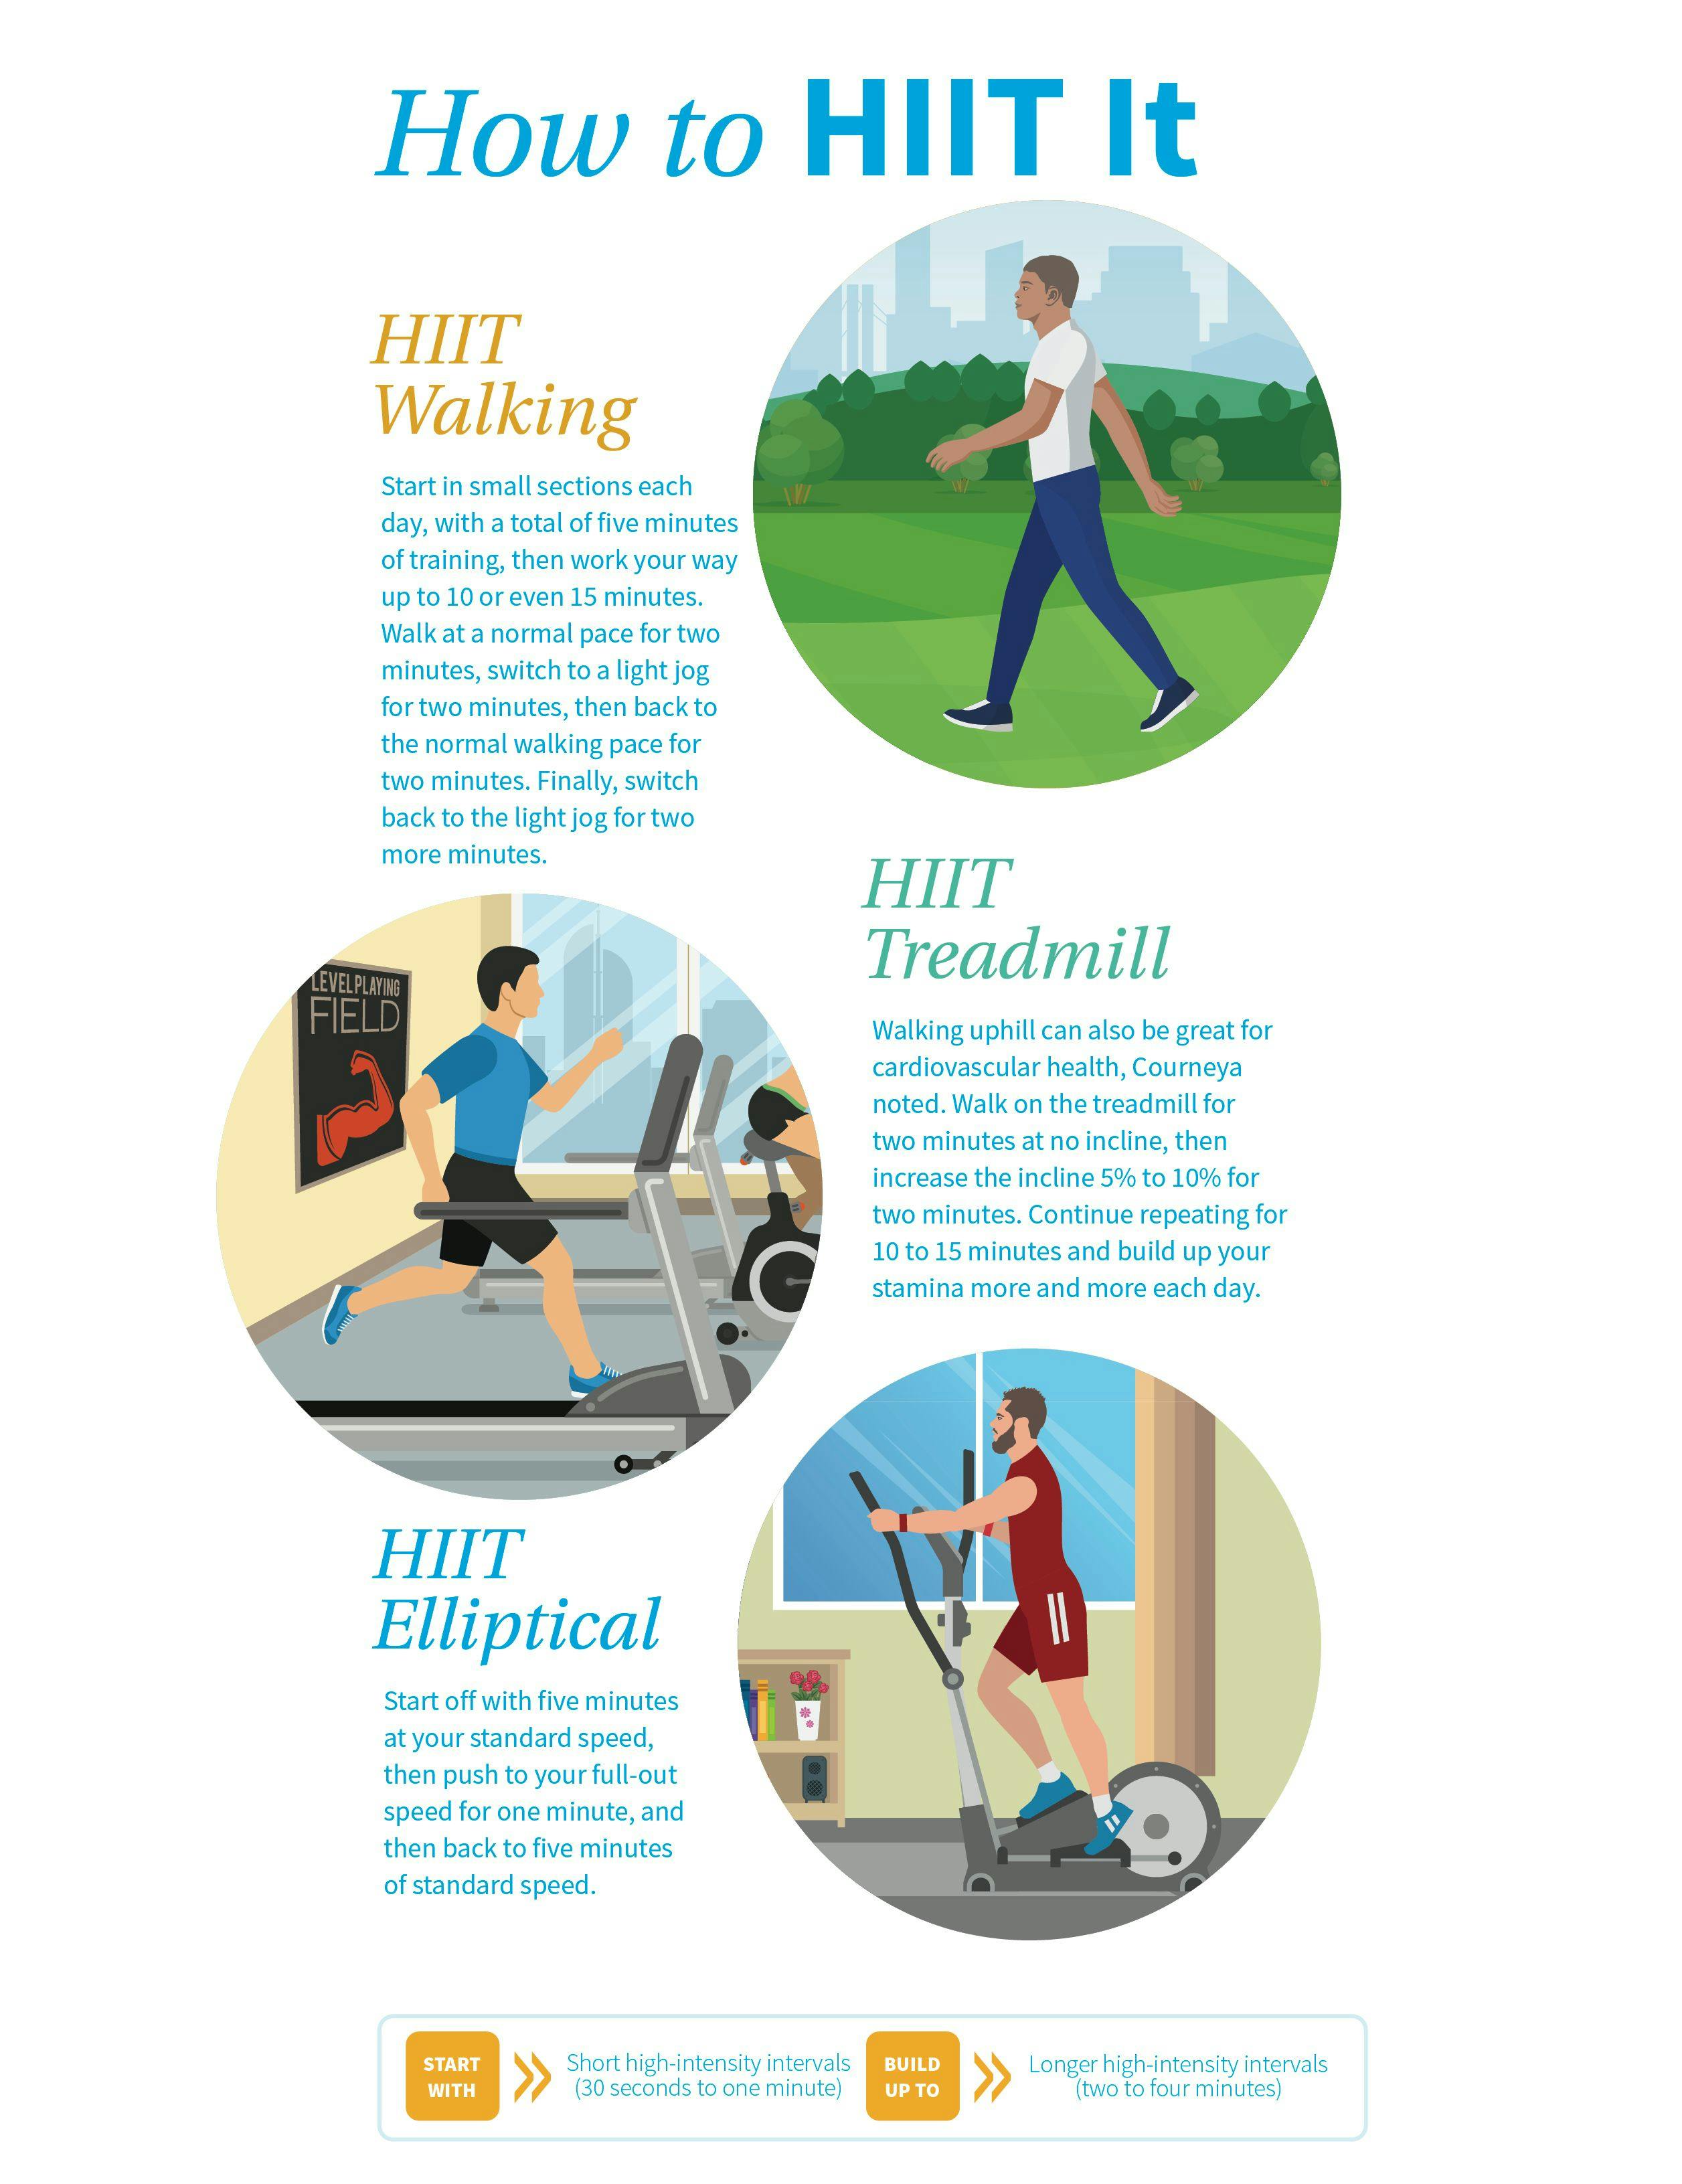 A step-by-step guide on how to incorporate HIIT workouts